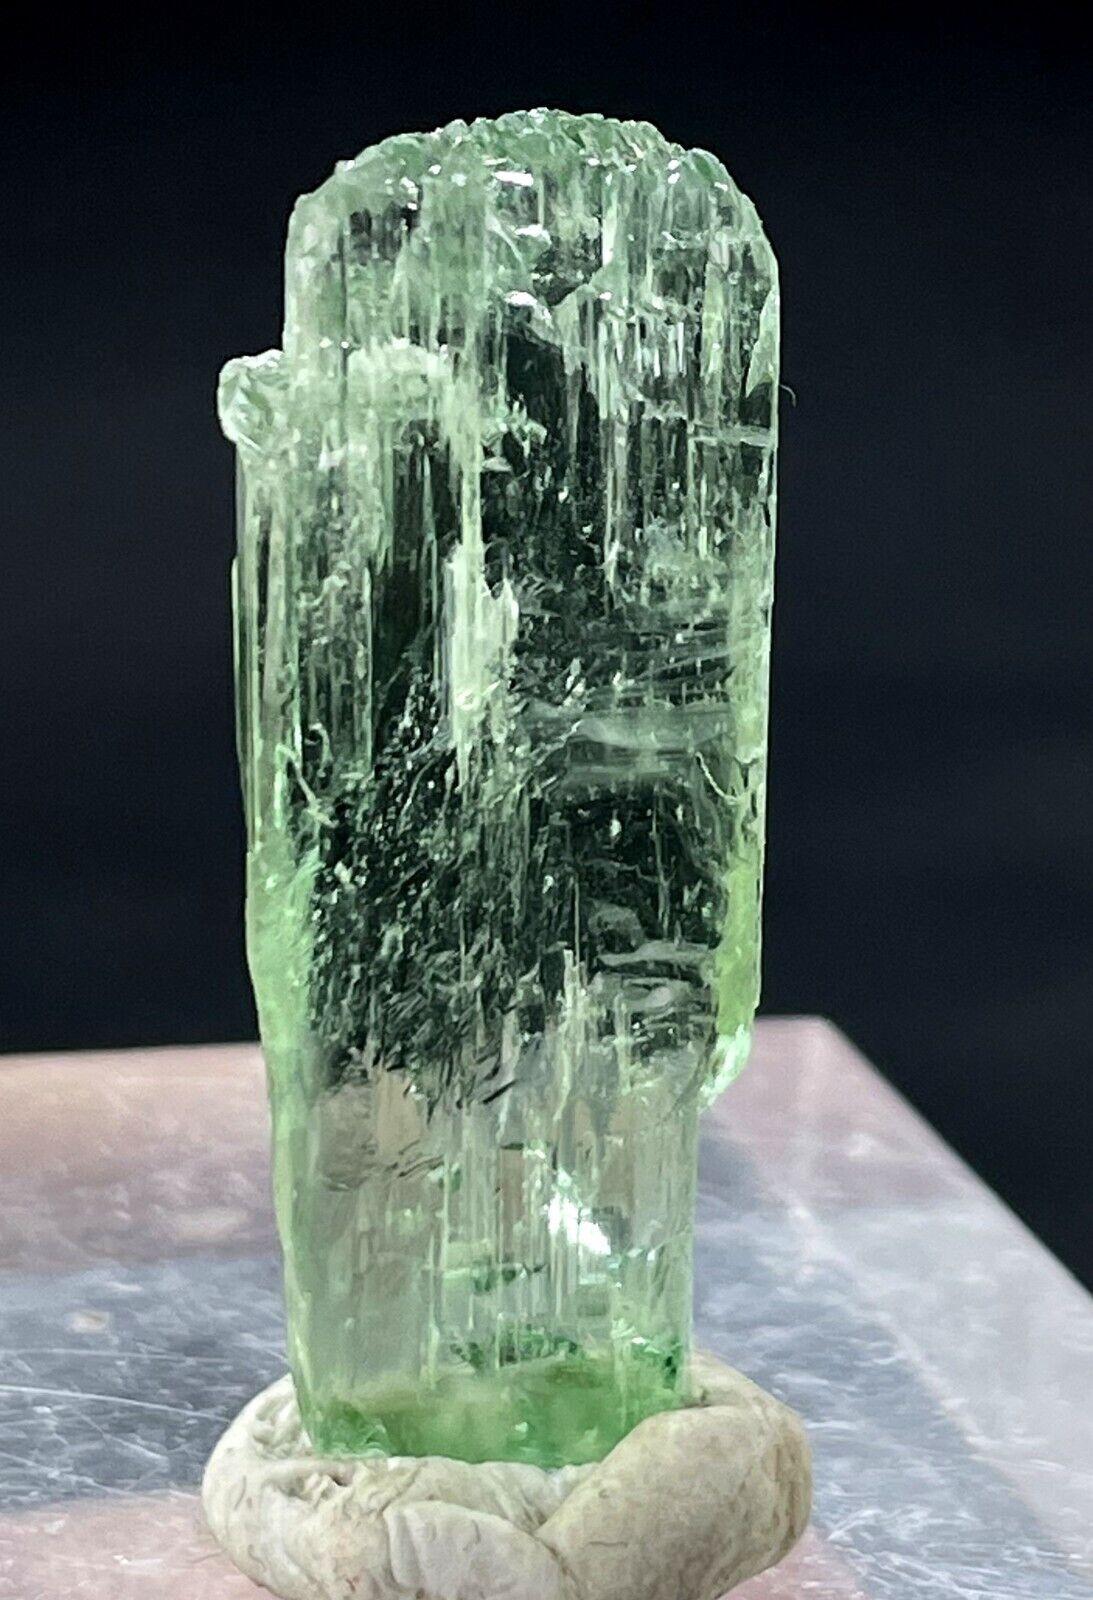 30 carats of Lush Green Kunzite Crystal from Kunar, Afghanistan